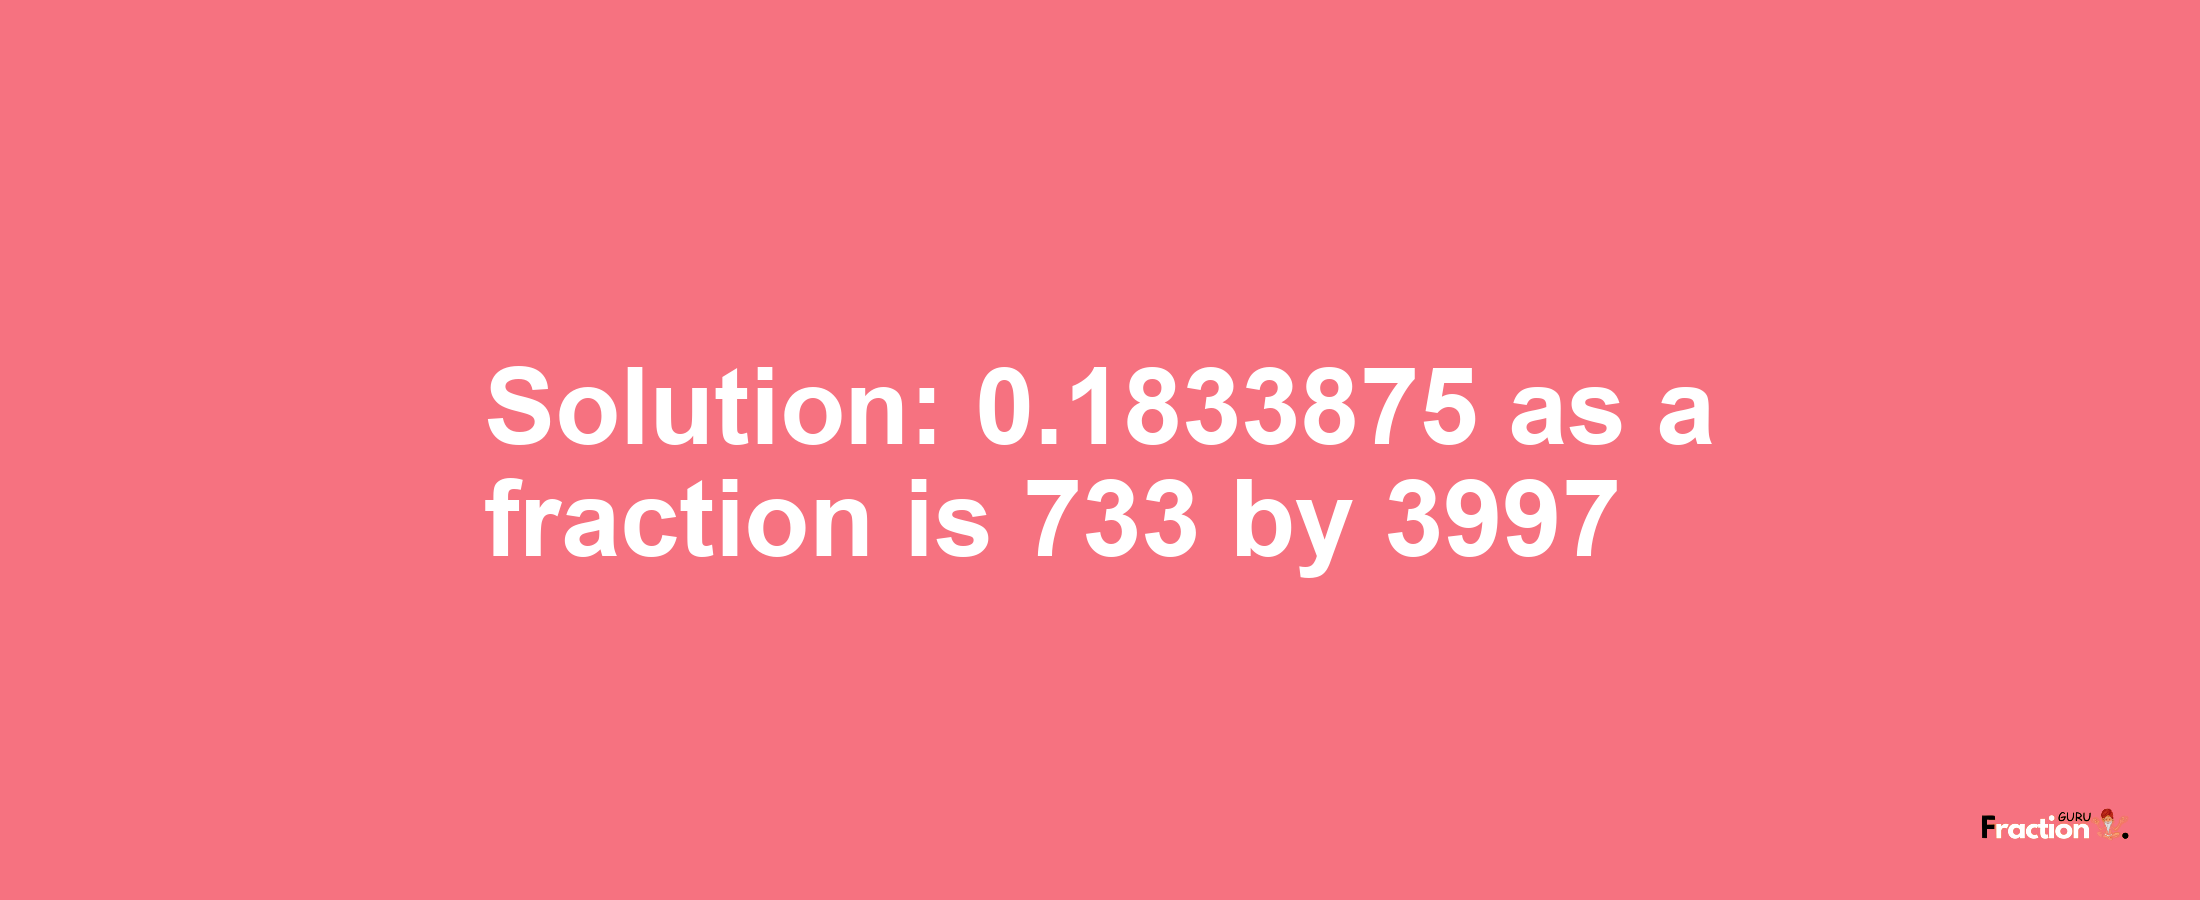 Solution:0.1833875 as a fraction is 733/3997